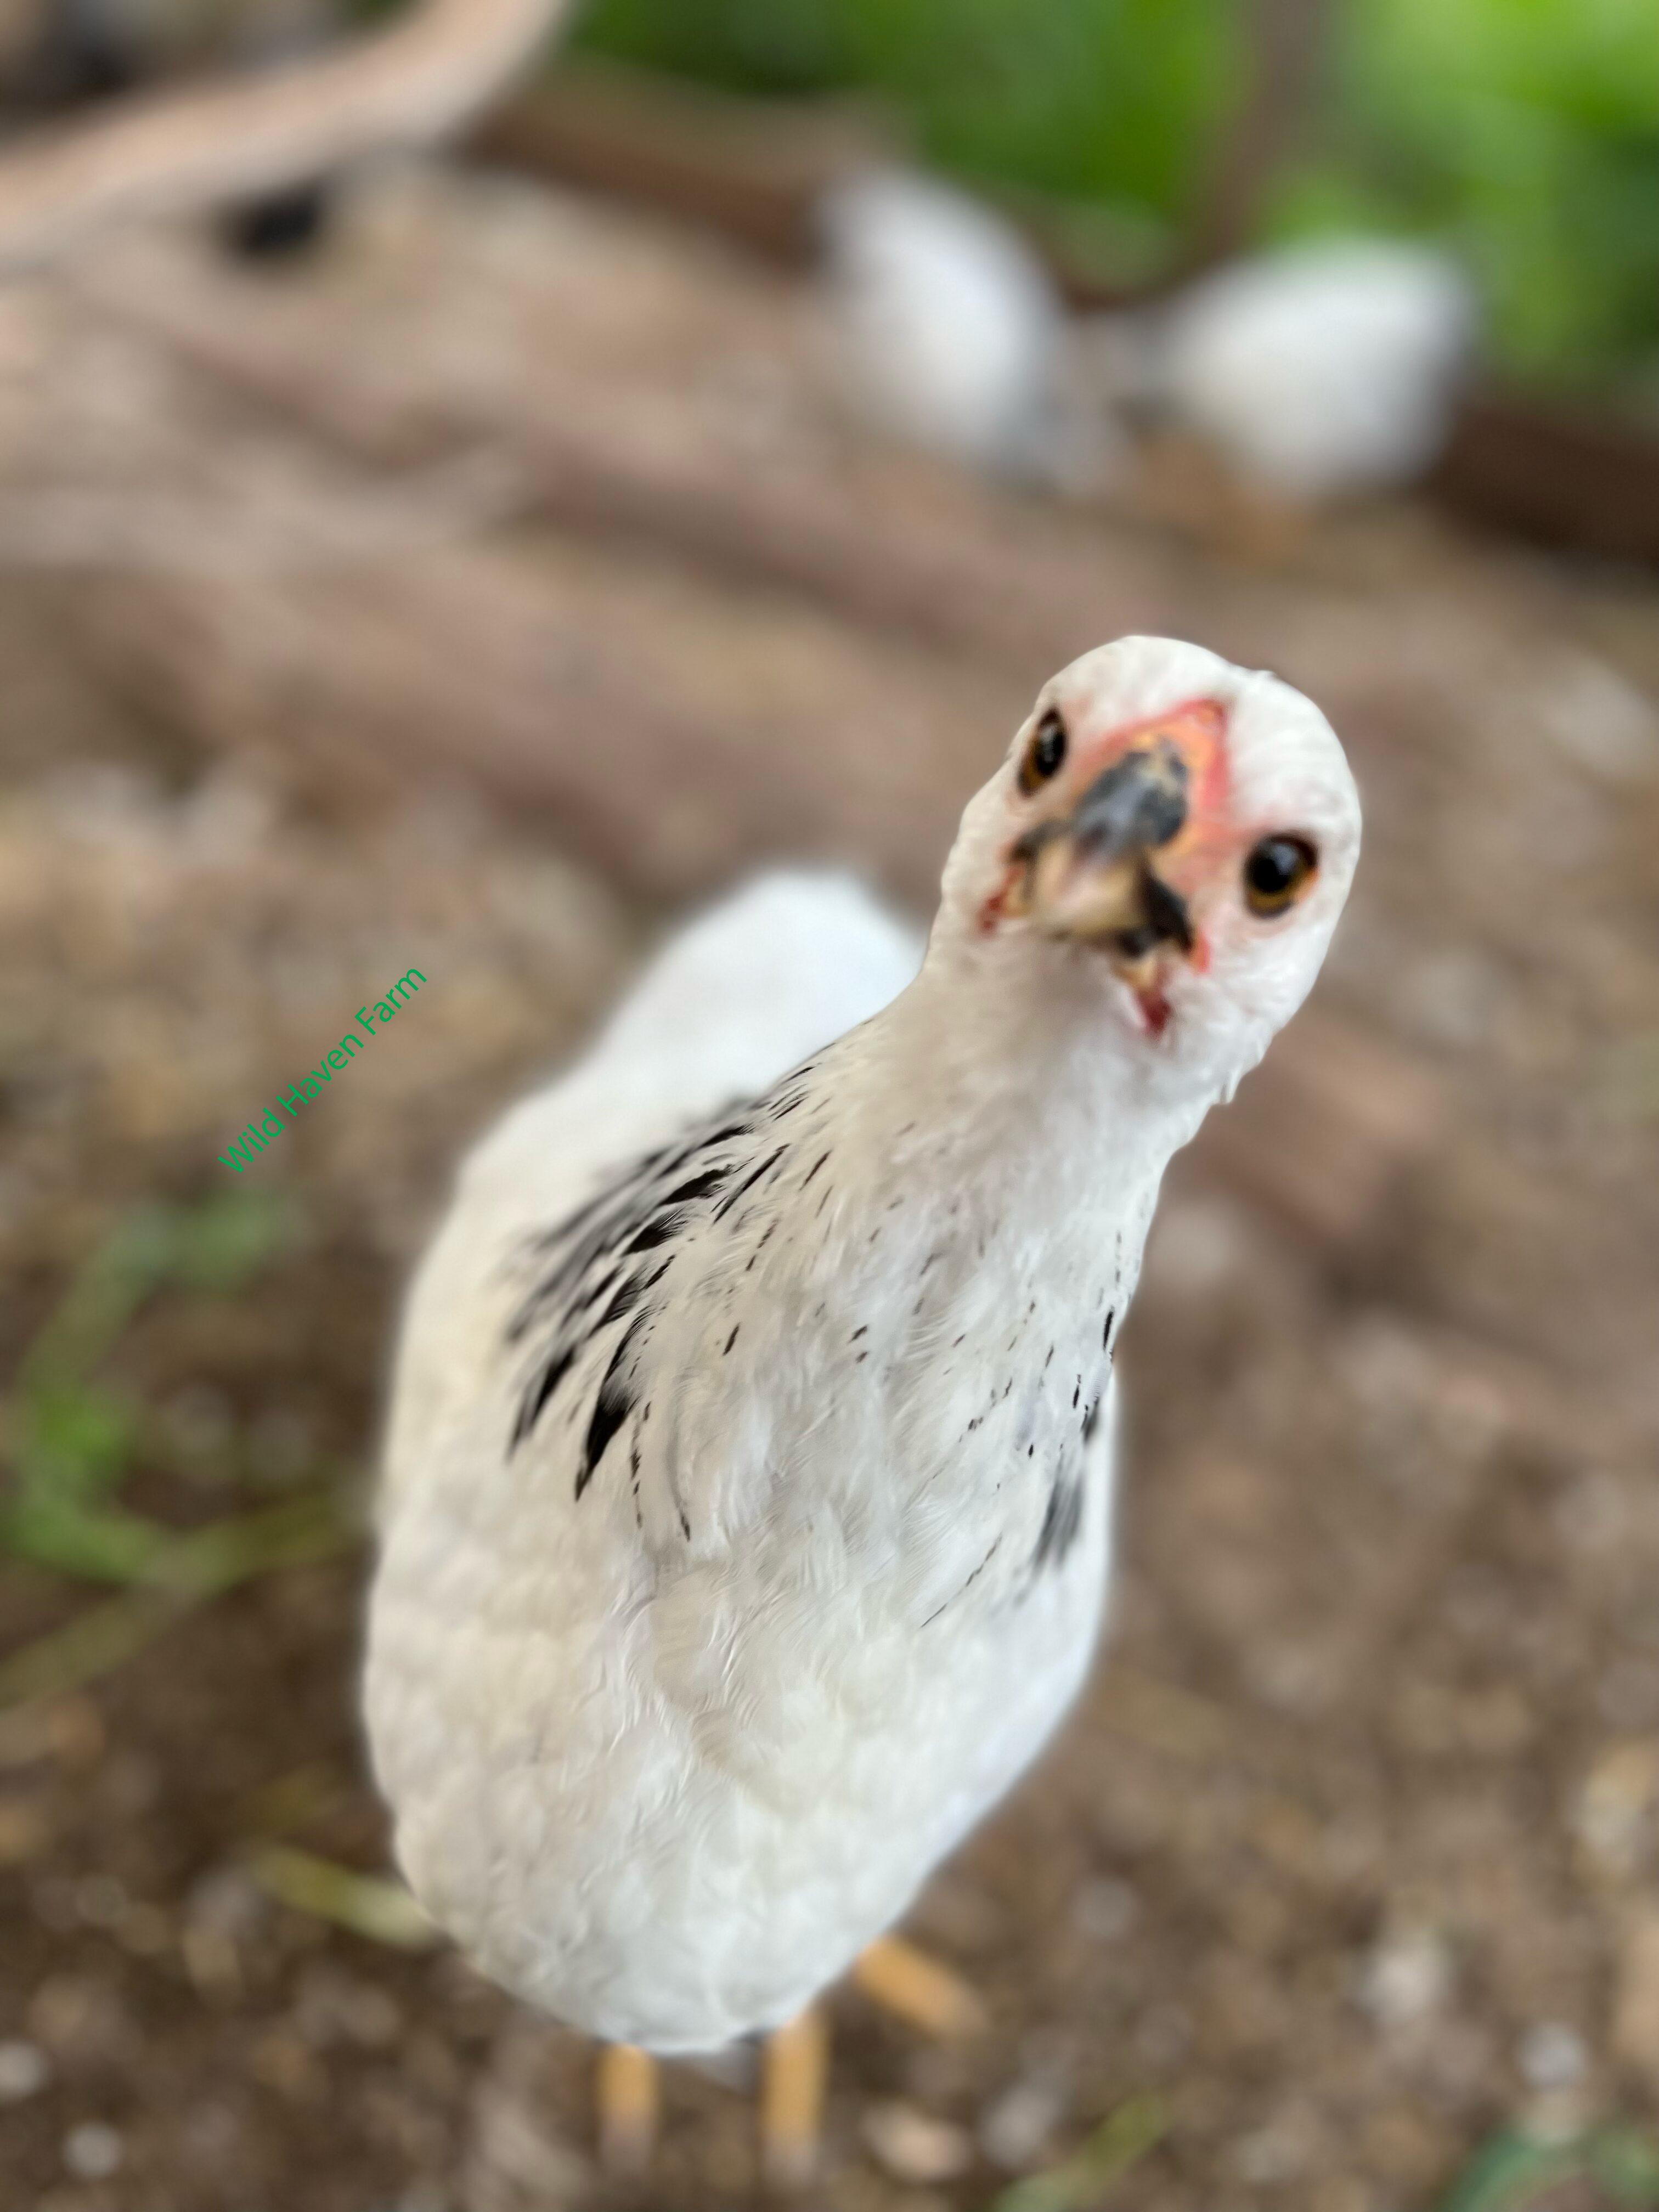 Columbian Wyandotte chicken looking at the camera